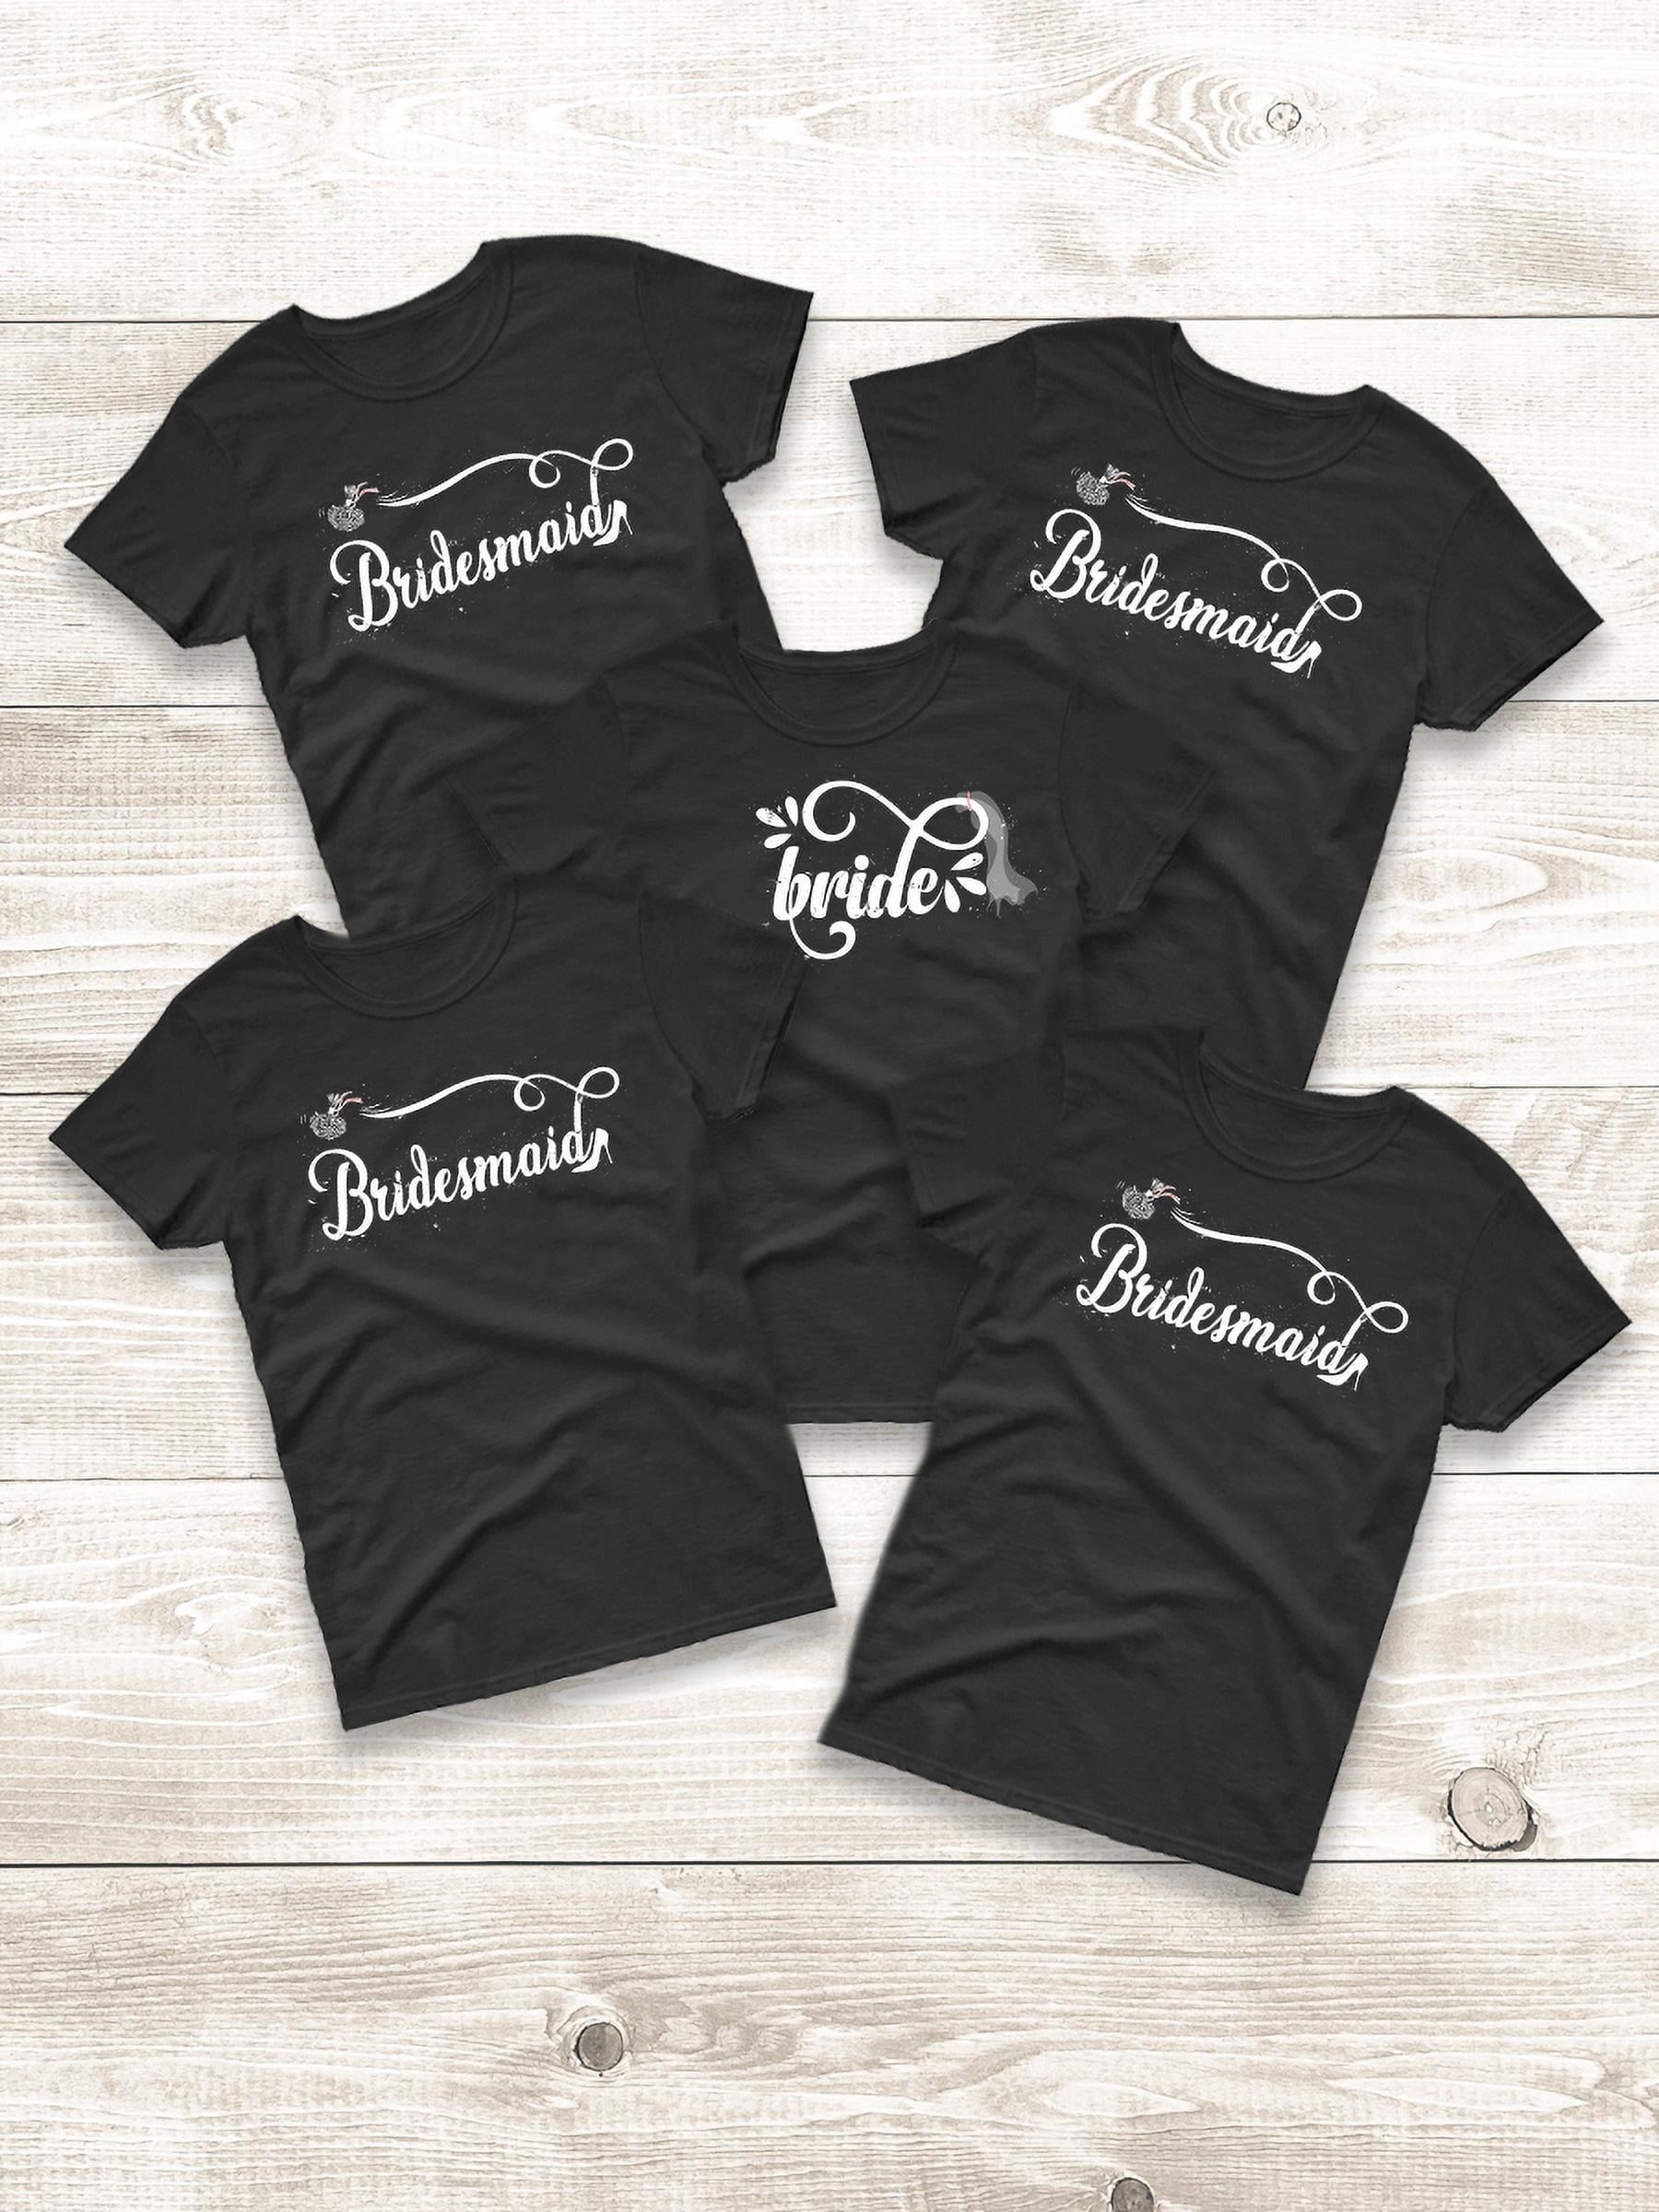 Bachelorette party t-shirts bridesmaid maid of honor custom shirts or tanks trendy squad crew team outing bridal party bridesmaid gifts